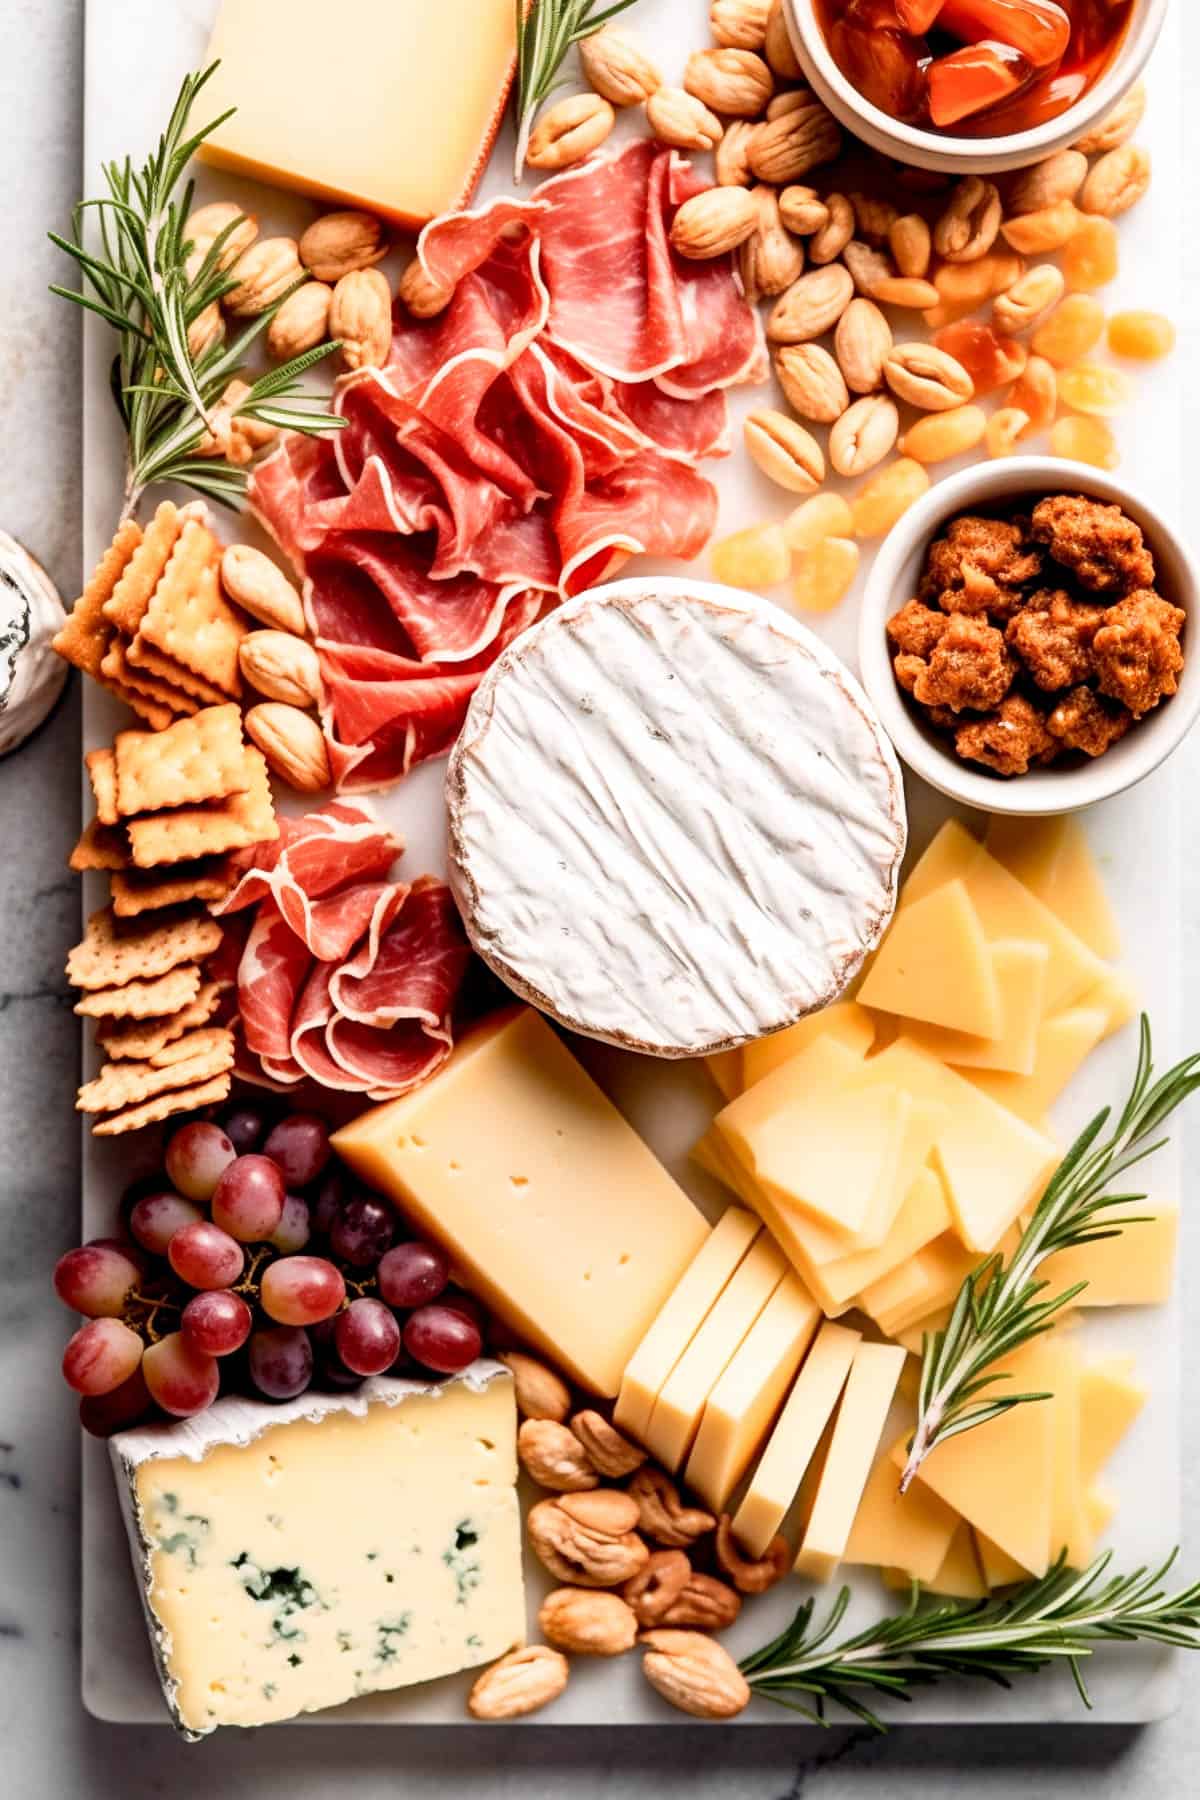 A selection of cheeses on a cheeseboard with charcuterie and condiments.